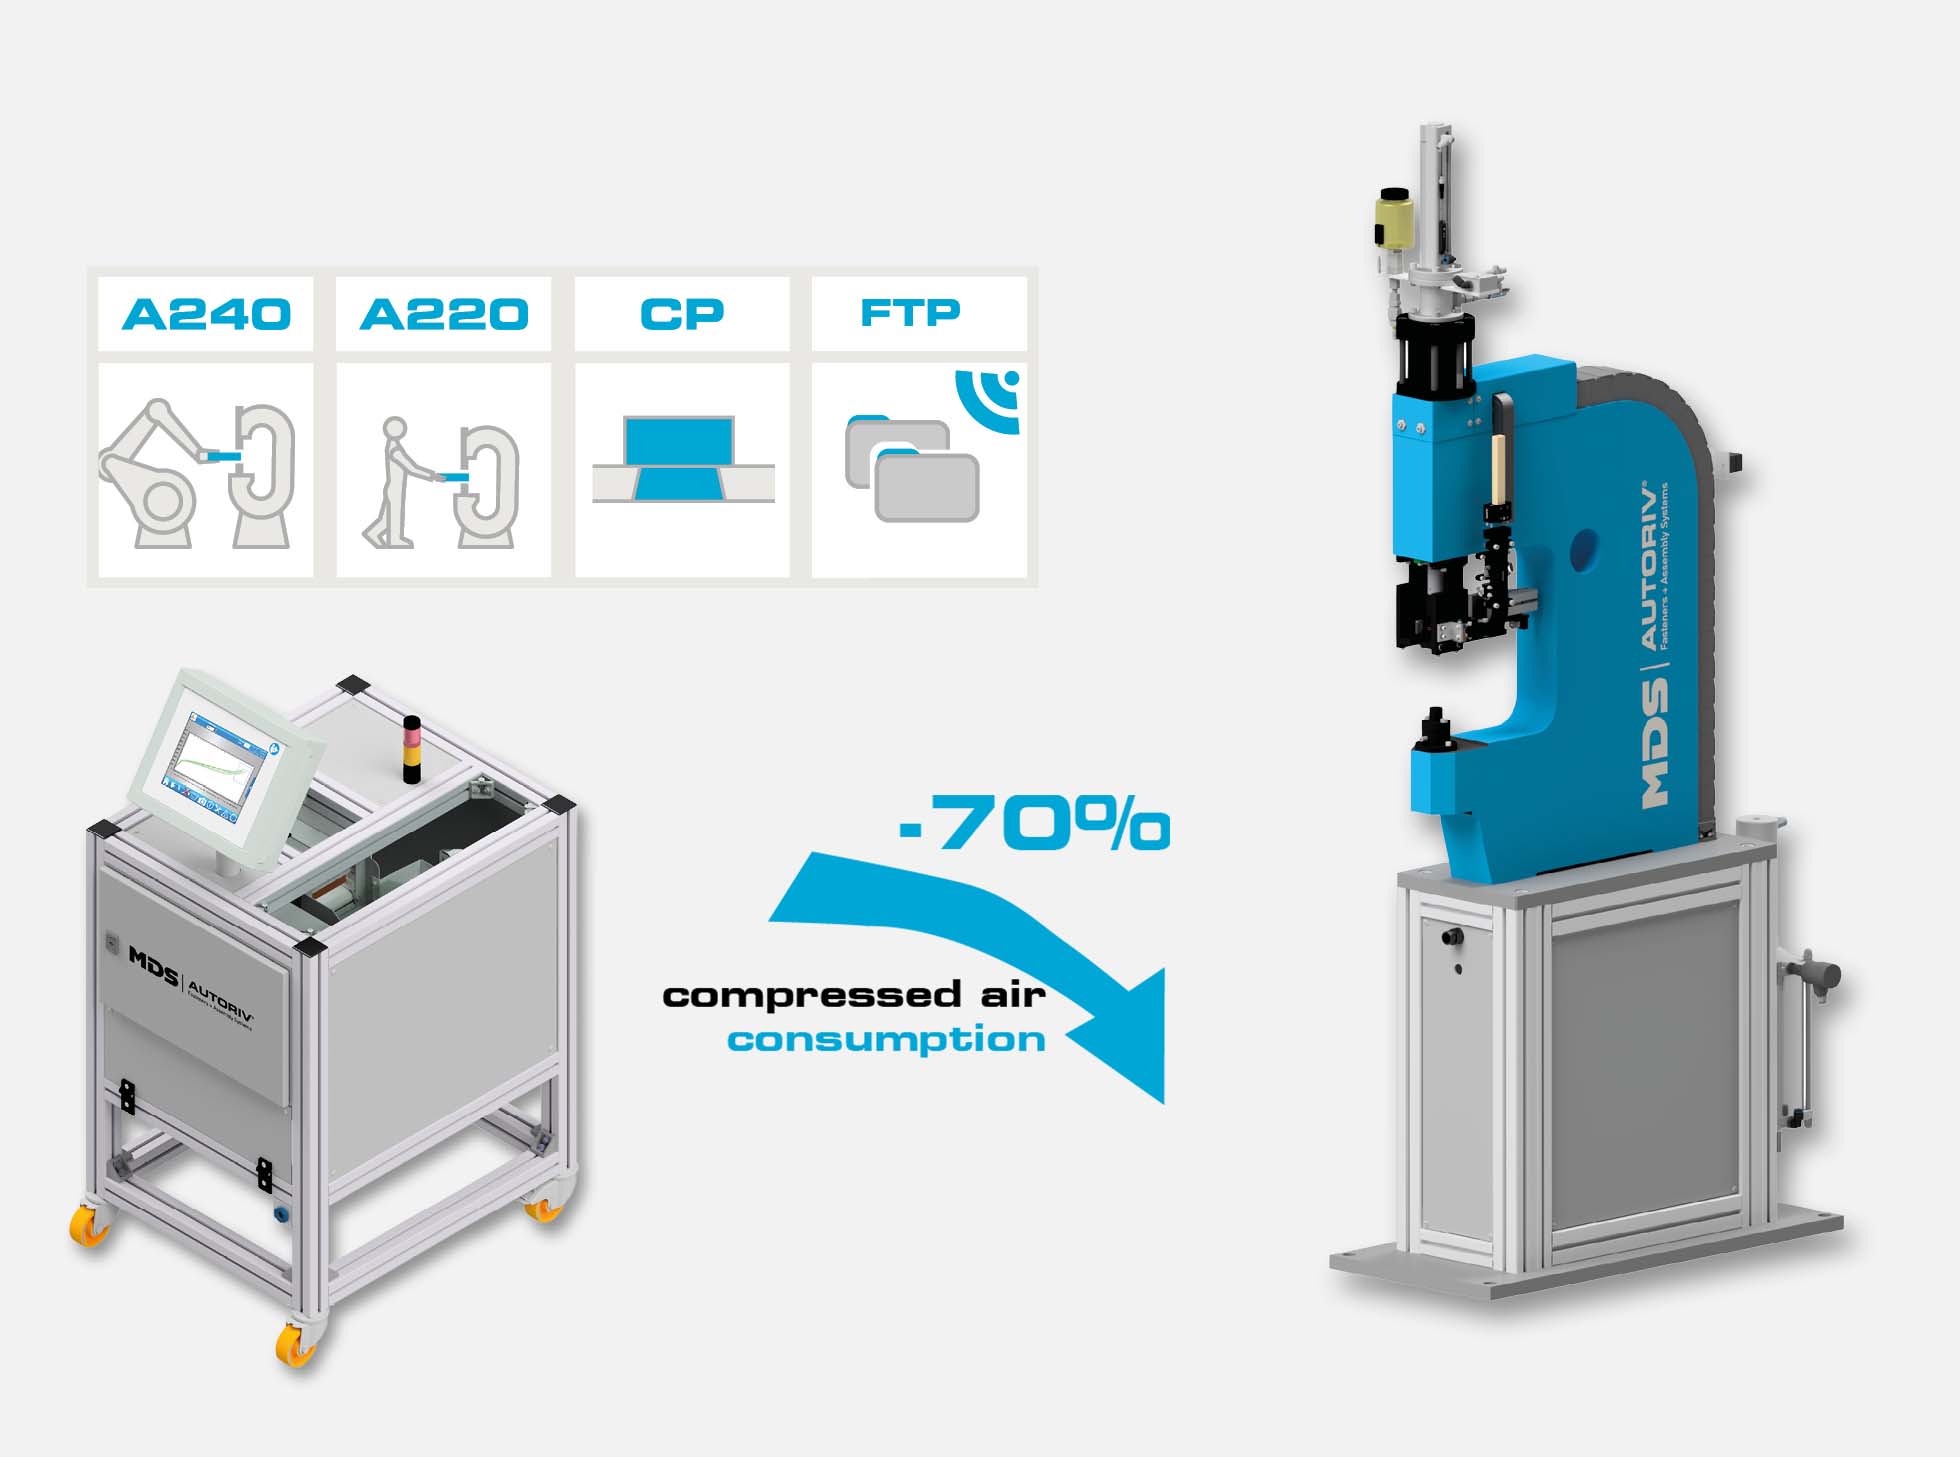 A240-PD-2 robotic workstation assembly clinching fasteners